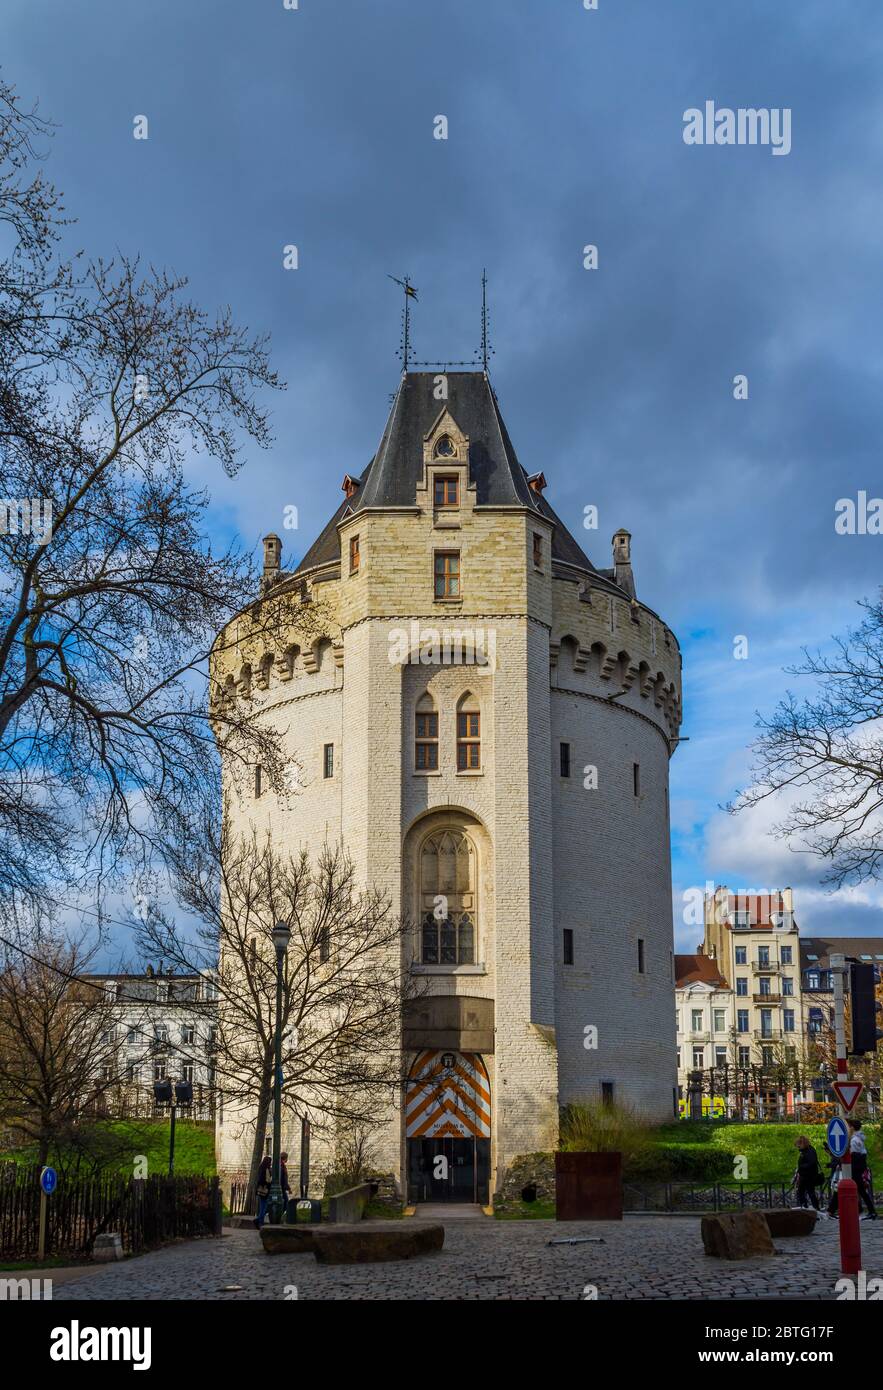 14th century Halle Gate / Porte de Hal fortified city gate now a history  museum - Saint-Gilles, Brussels, Belgium Stock Photo - Alamy